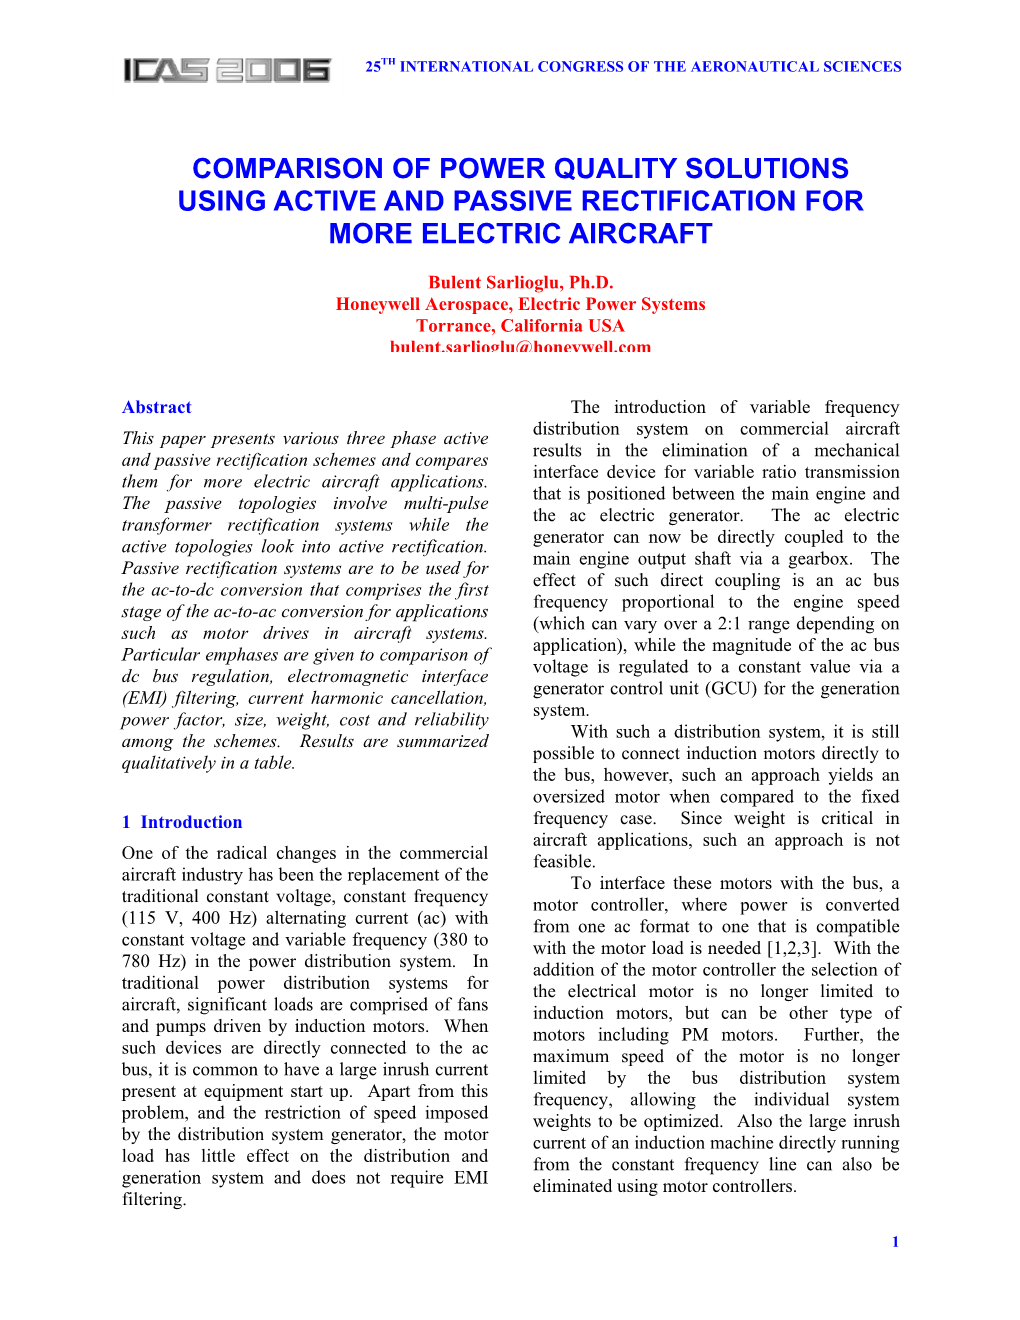 Comparison of Power Quality Solutions Using Active and Passive Rectification for More Electric Aircraft